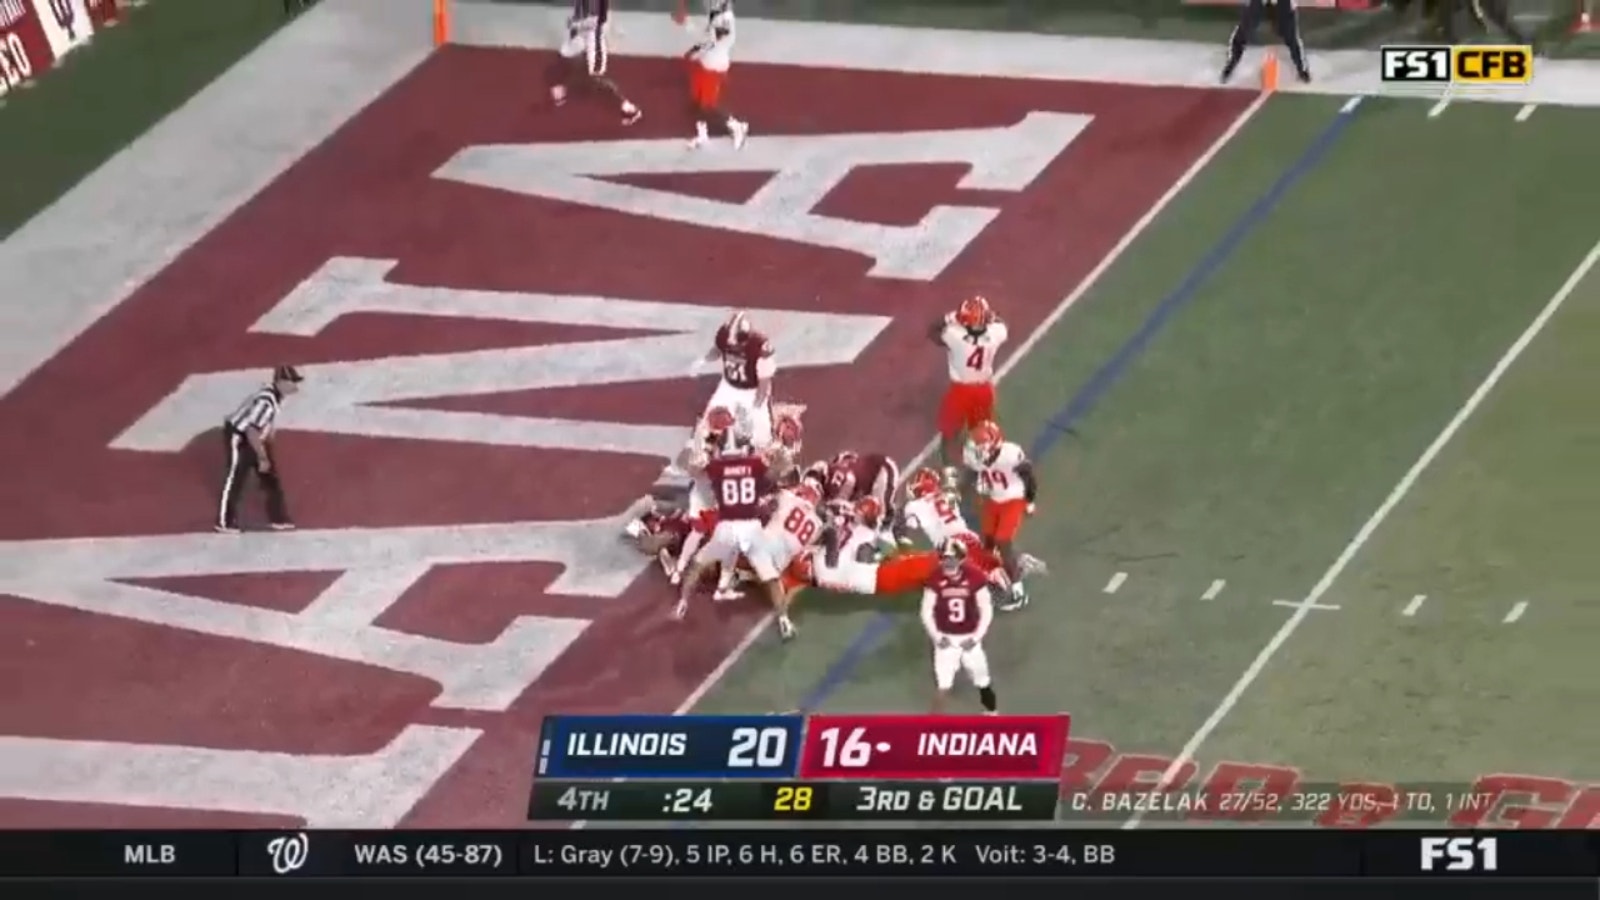 Shaun Shivers gives Indiana the victory